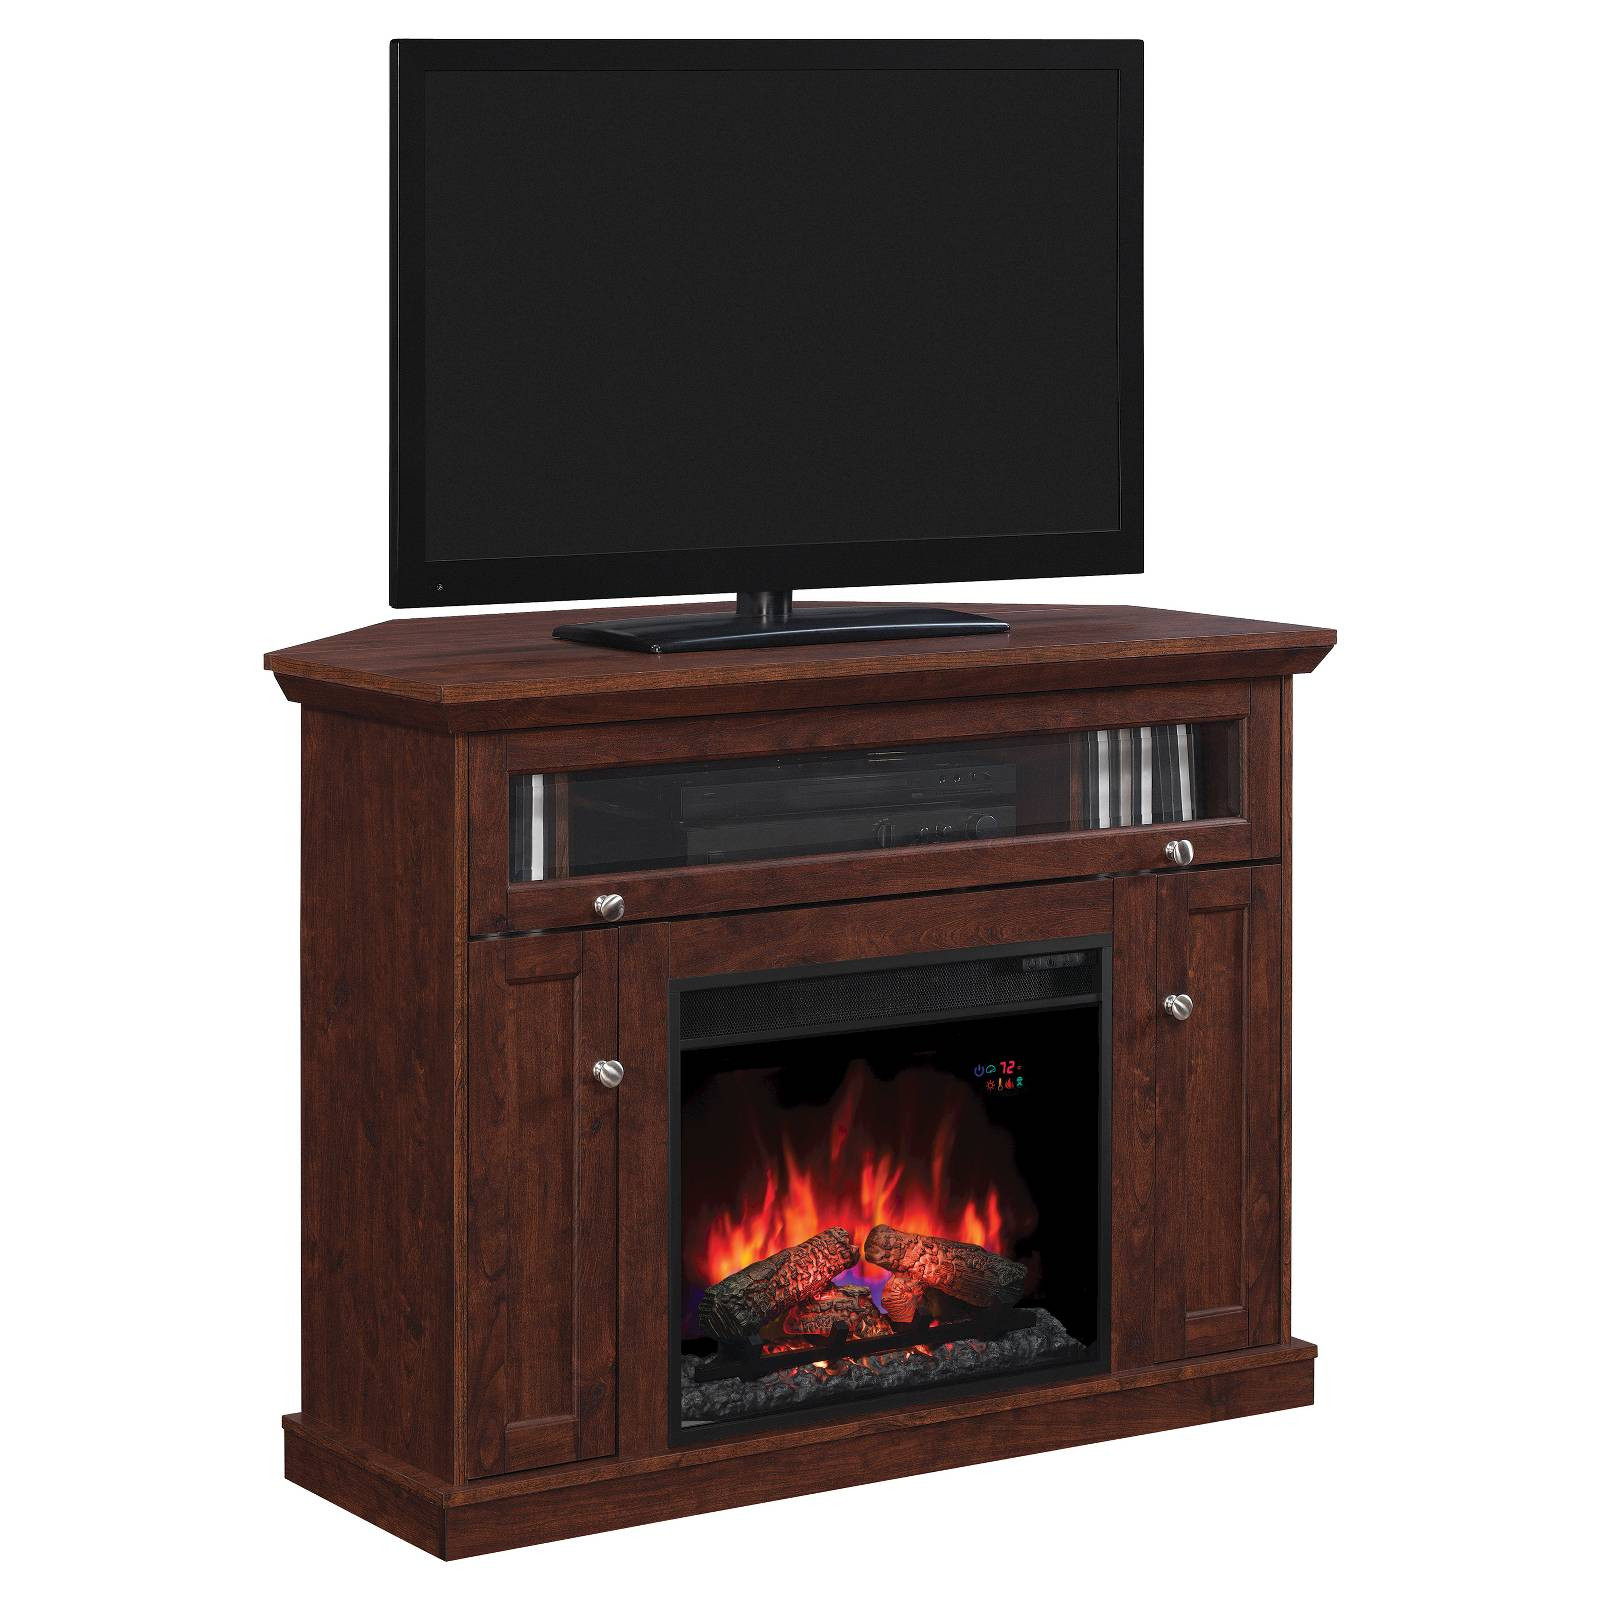 Target Electric Fireplace
 Windsor TV Stand with Electric Fireplace 46